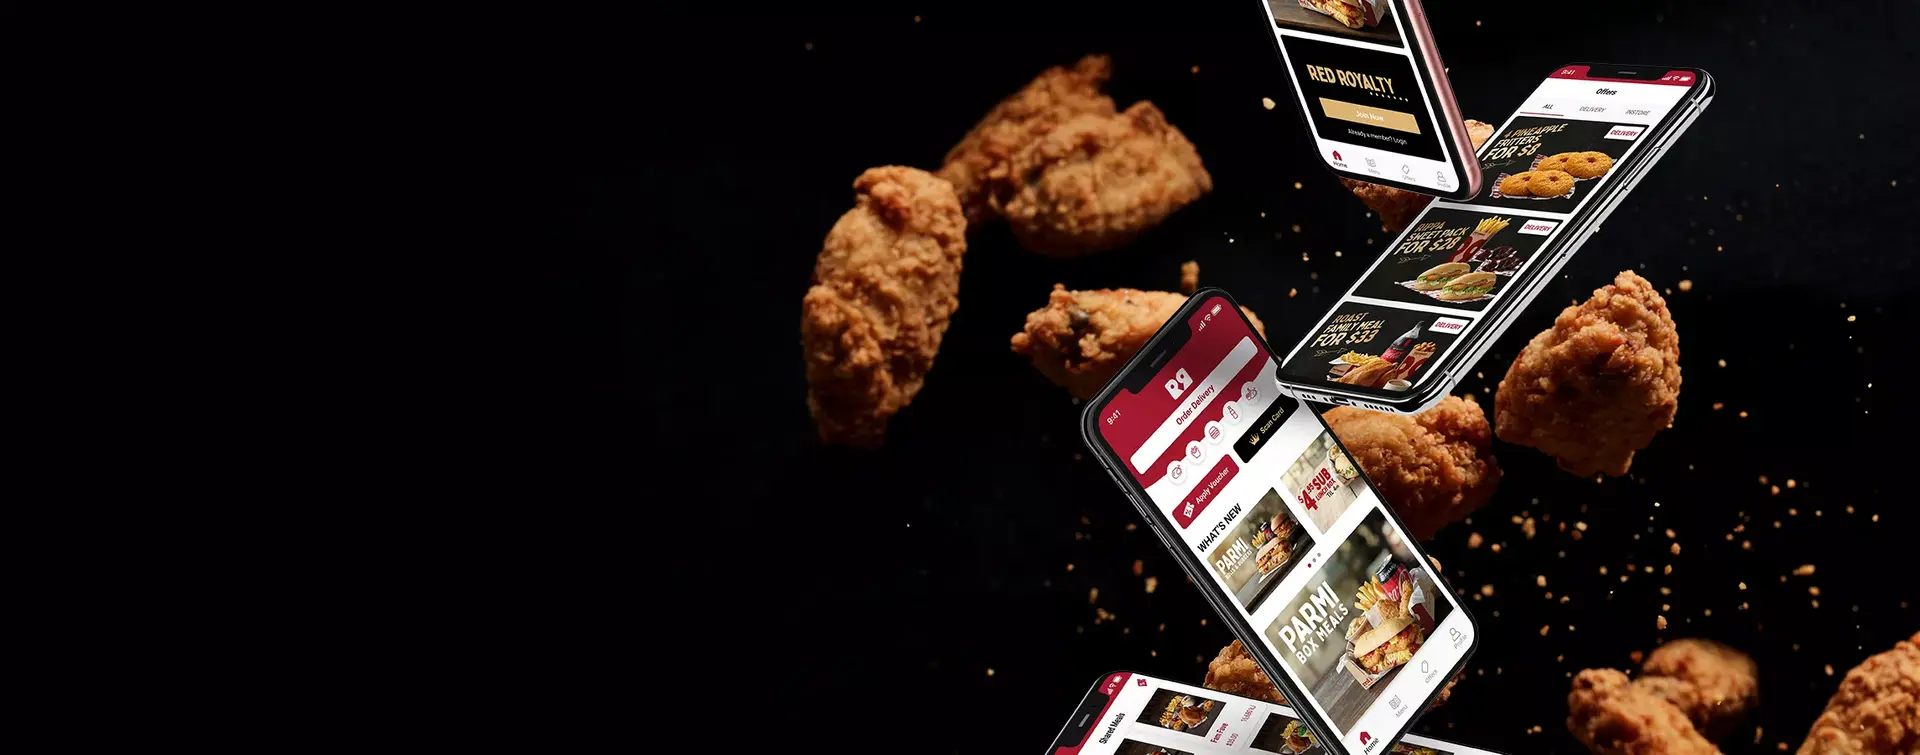 THE RED ROOSTER APP